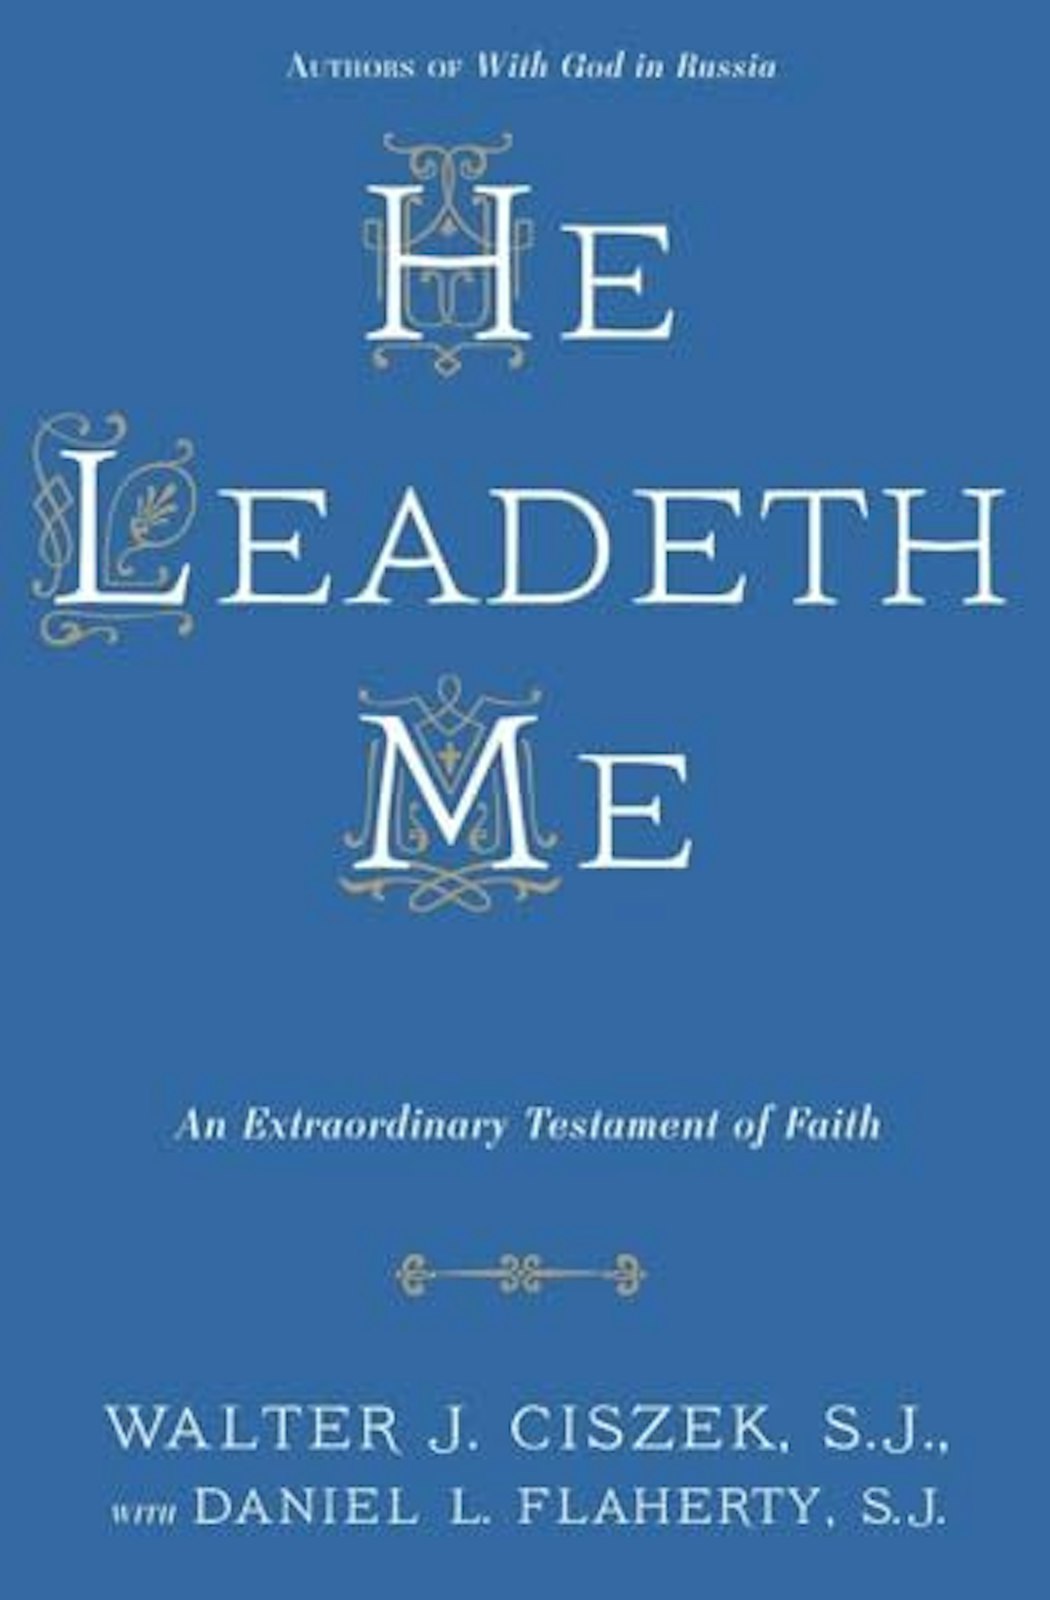 In 1973, Fr. Ciszek wrote his second book, "He Leadeth Me," about his spiritual ordeal behind the Iron Curtain, a book that has become one of the modern spiritual classics of the 20th century.